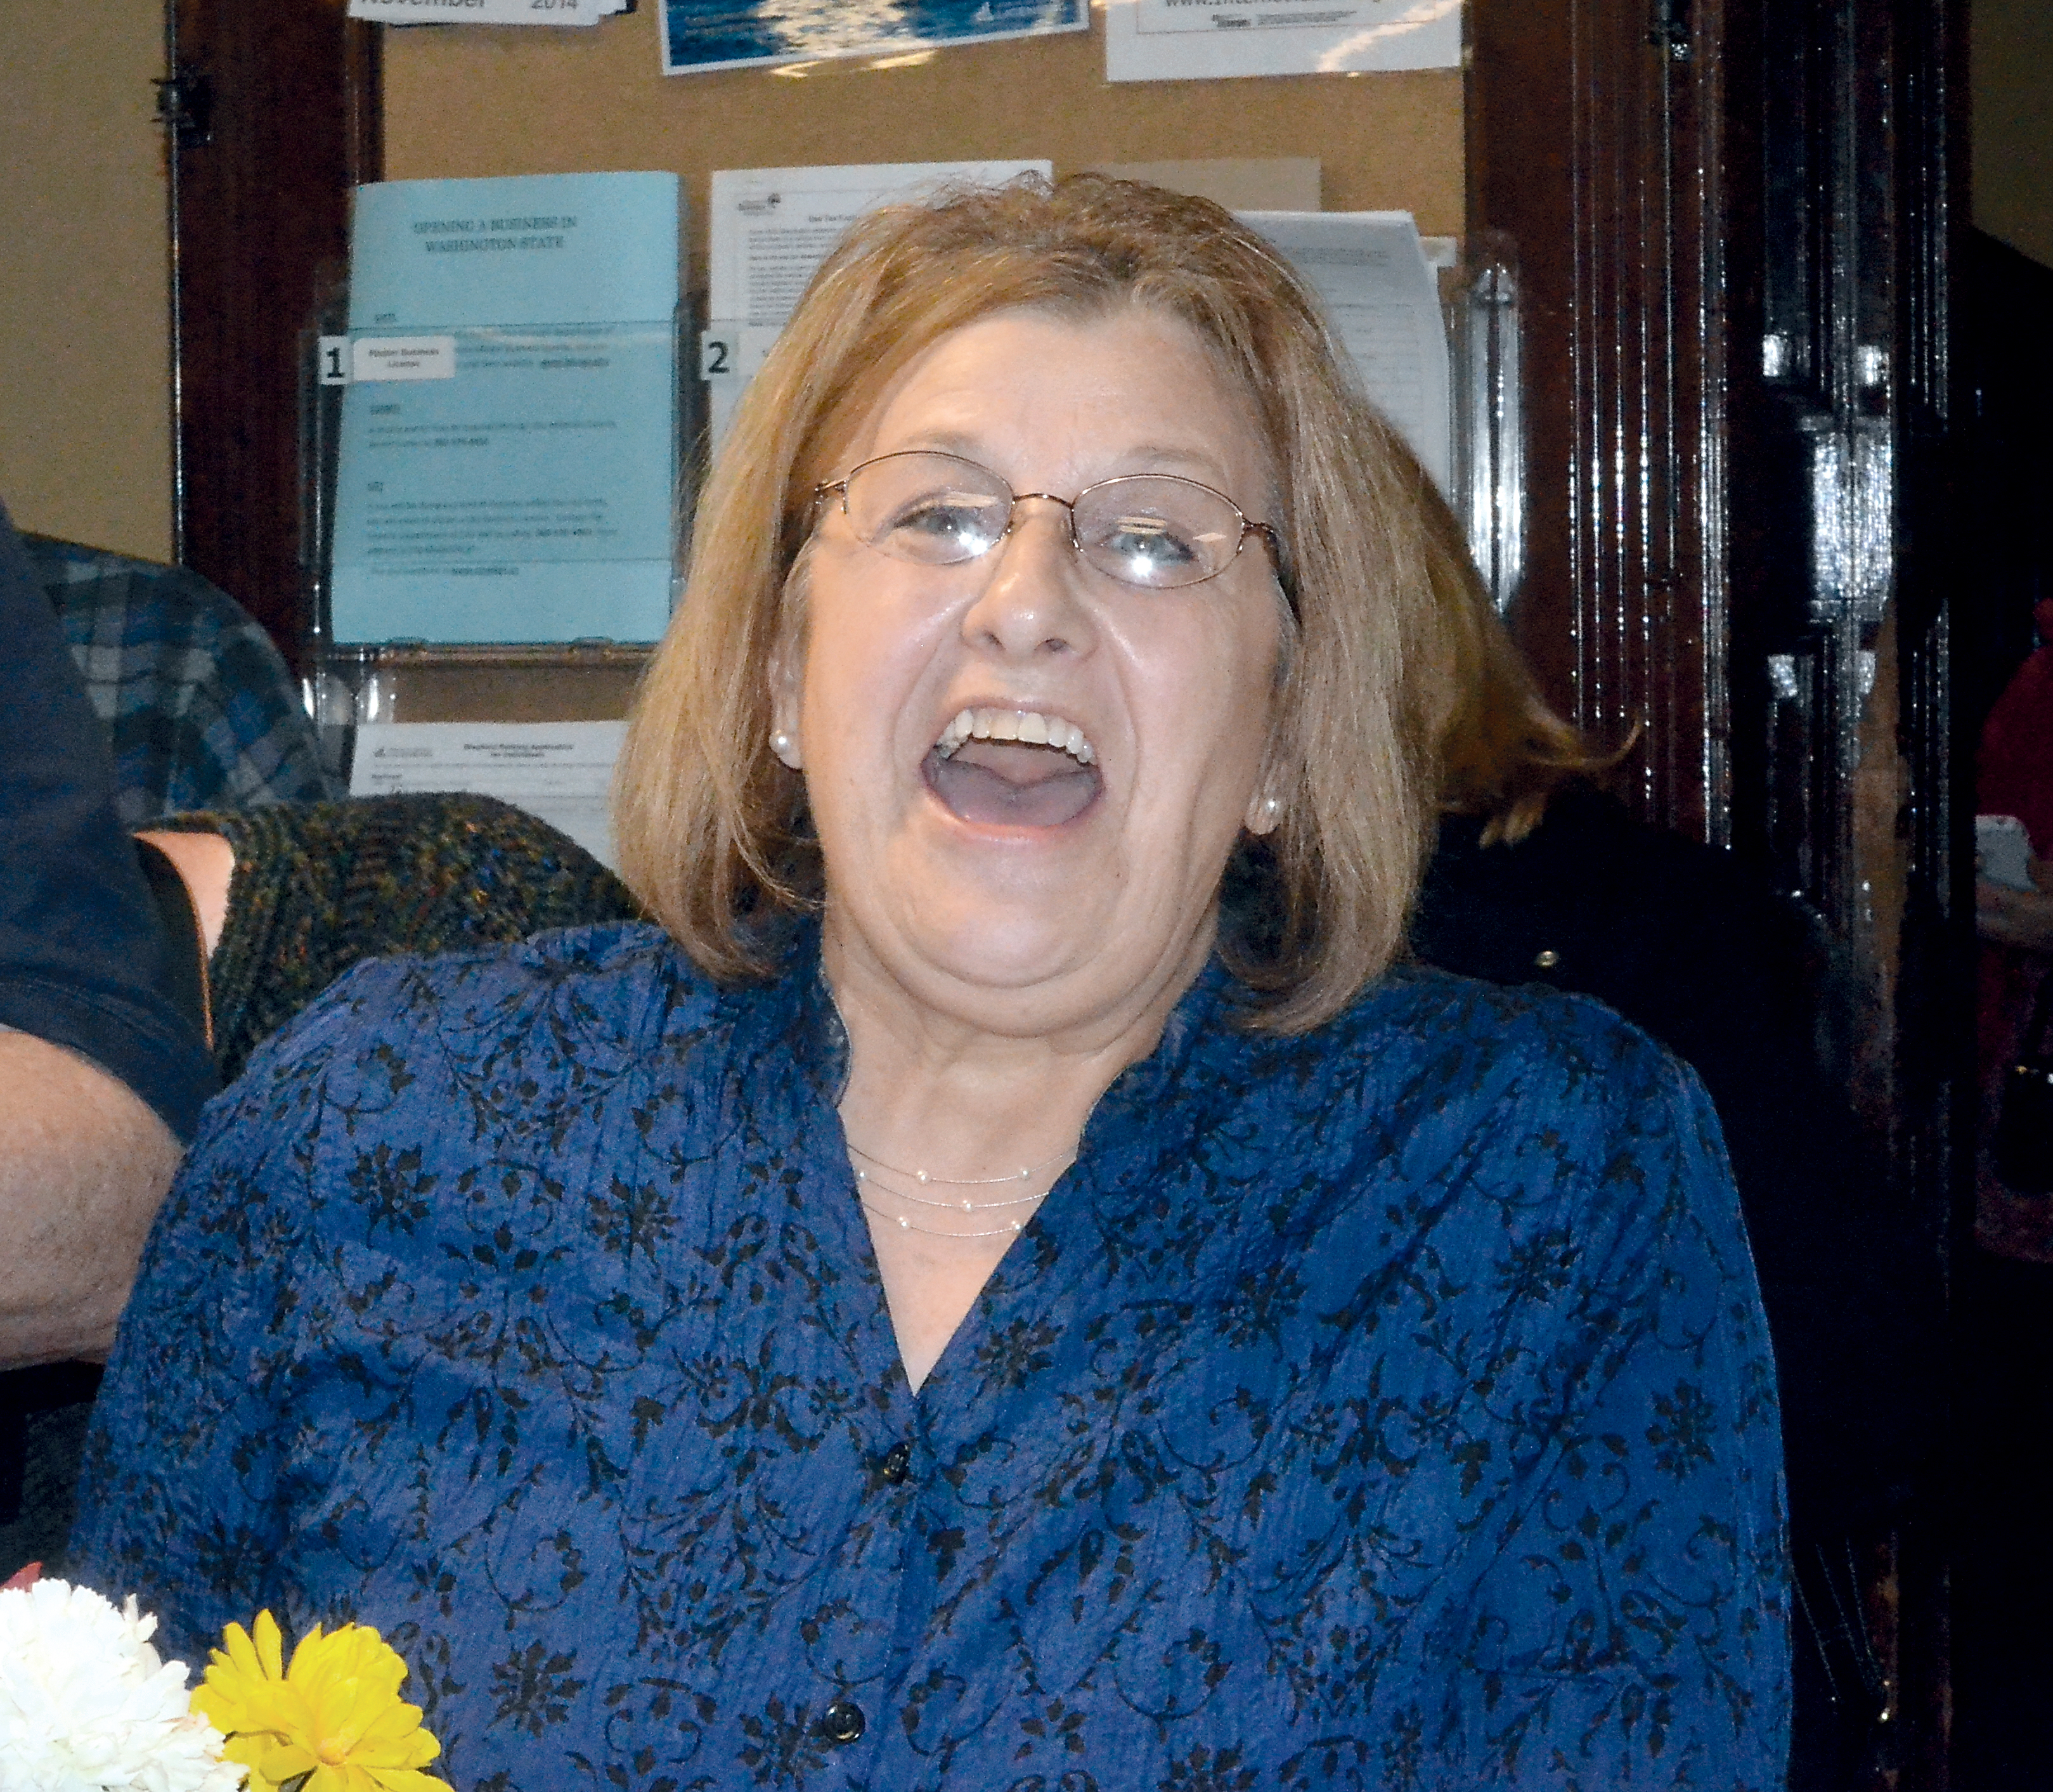 Rose Ann Carroll shows delight after seeing Tuesday night's election returns at the Jefferson County Courthouse. Charlie Bermant/Peninsula Daily News